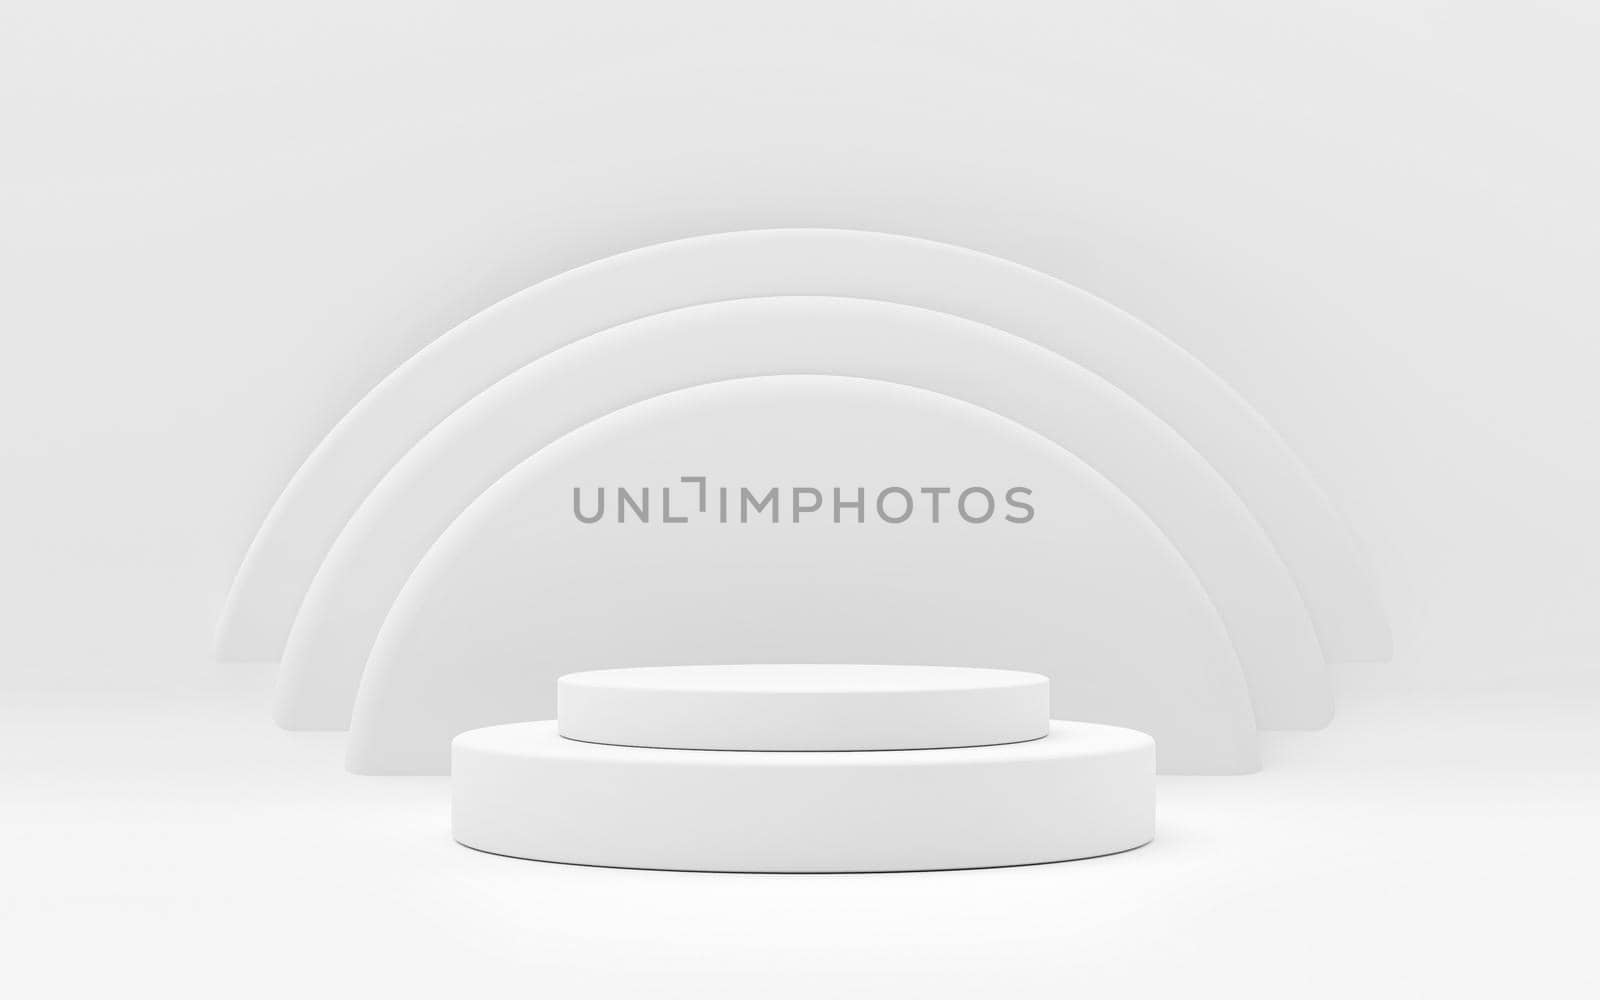 White product stand on white background. Abstract minimal geometry concept. Studio podium platform theme. Exhibition and business marketing presentation stage. 3D illustration rendering graphic design